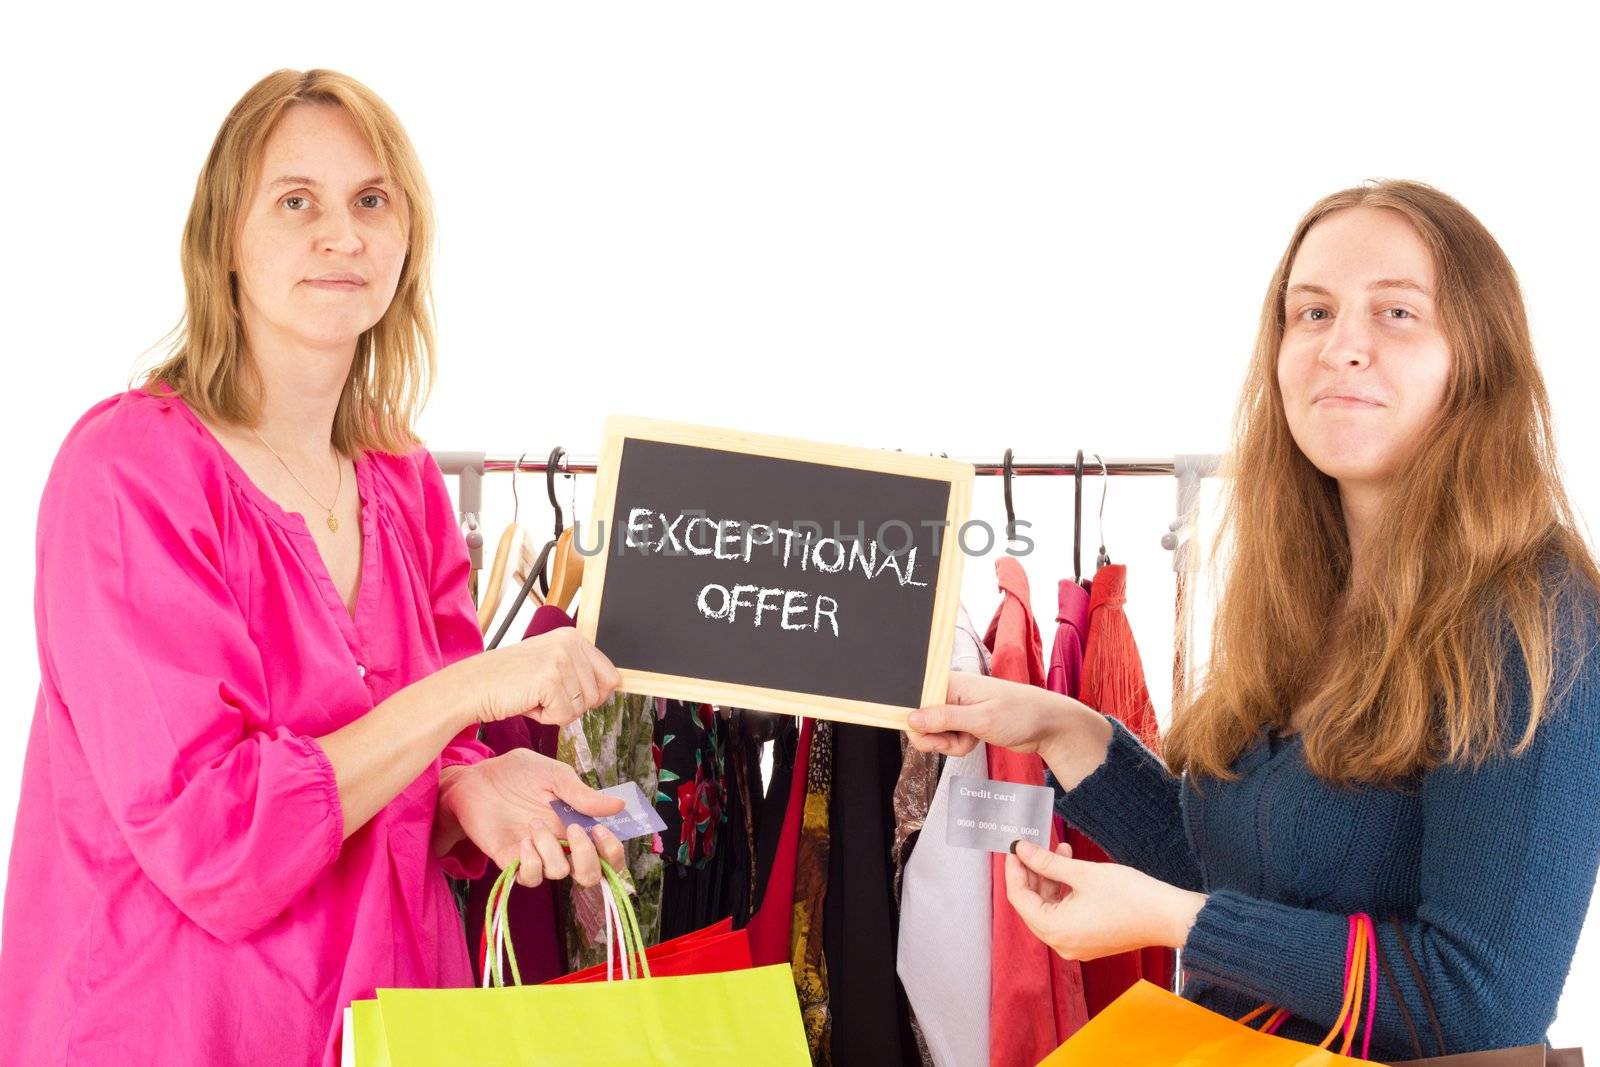 People on shopping tour: exceptional offer